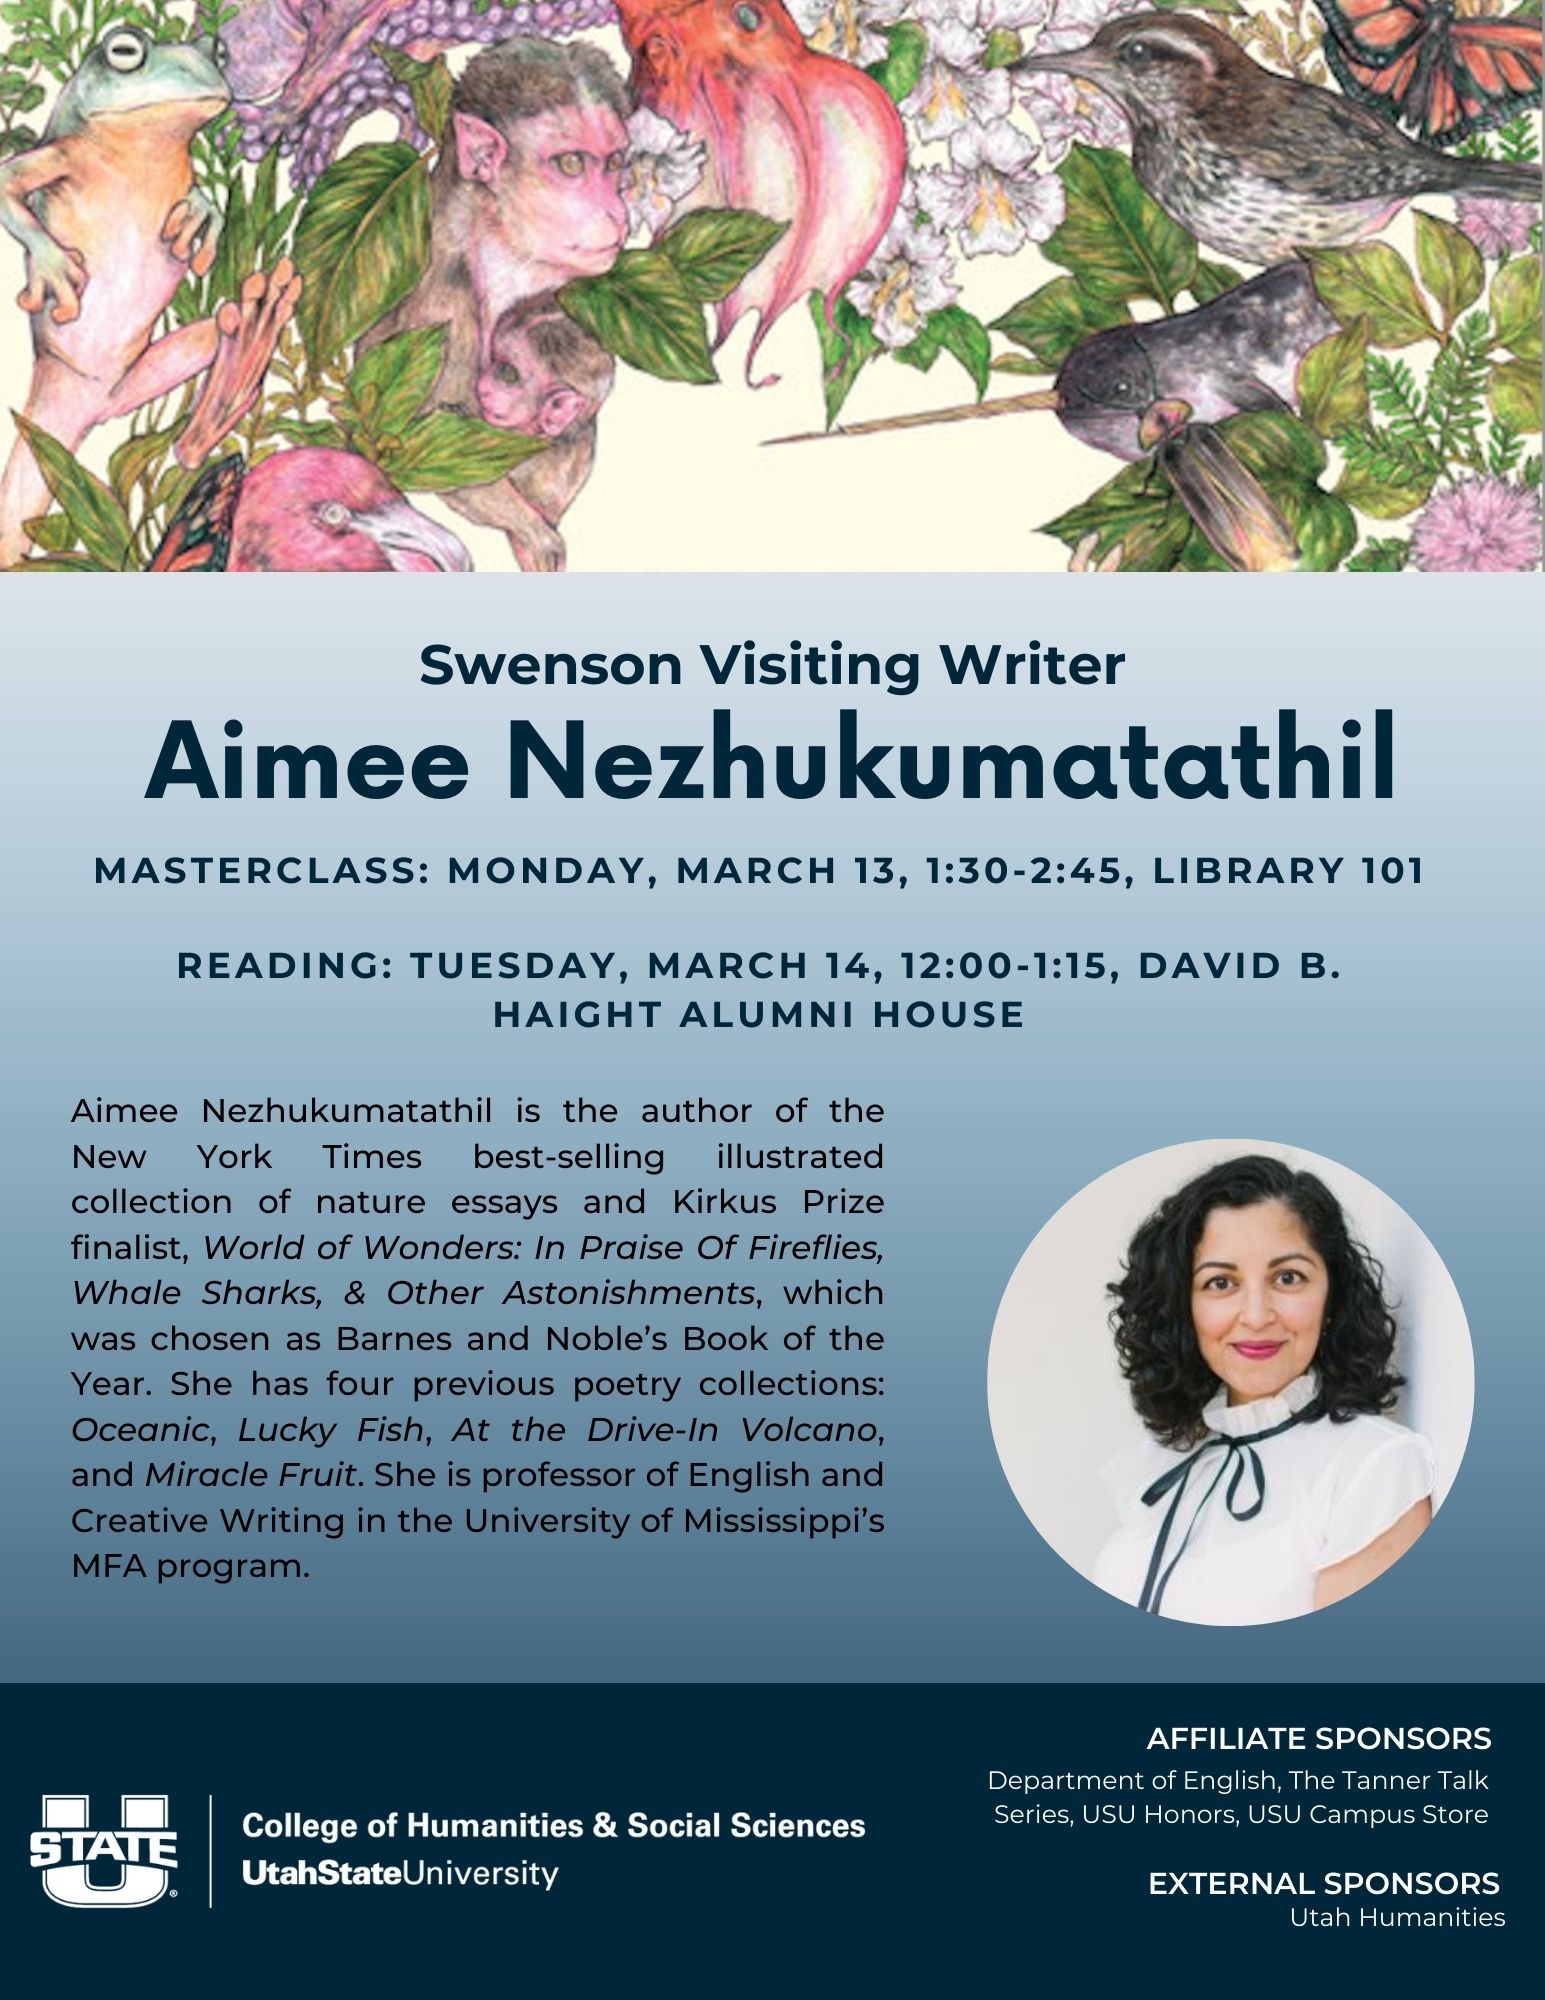 Swenson Visiting Writer, Aimee Nezhukumatathil. Masterclass: Monday March 13 1:30-2:45 in Library 101  Reading: Tuesday March 14, 12:00-1:15 David B. Haight Alumni House.   Aimee Nezhukumatathil is the author of the New York Times best-selling illustrated collection of nature essays and Kirkus Prize finalist, World of Wonders: In Praise of Fireflies, Whale Sharks, & other Astonishments, which was chosen as Barnes and Noble's Book of the Year. She has four previous poetry collections: Oceanic, Lucky Fish, At the Drive-In Volcano, and Miracle Fruit. She is professor of English and Creative writing in the University Mississippi's MFA program. 